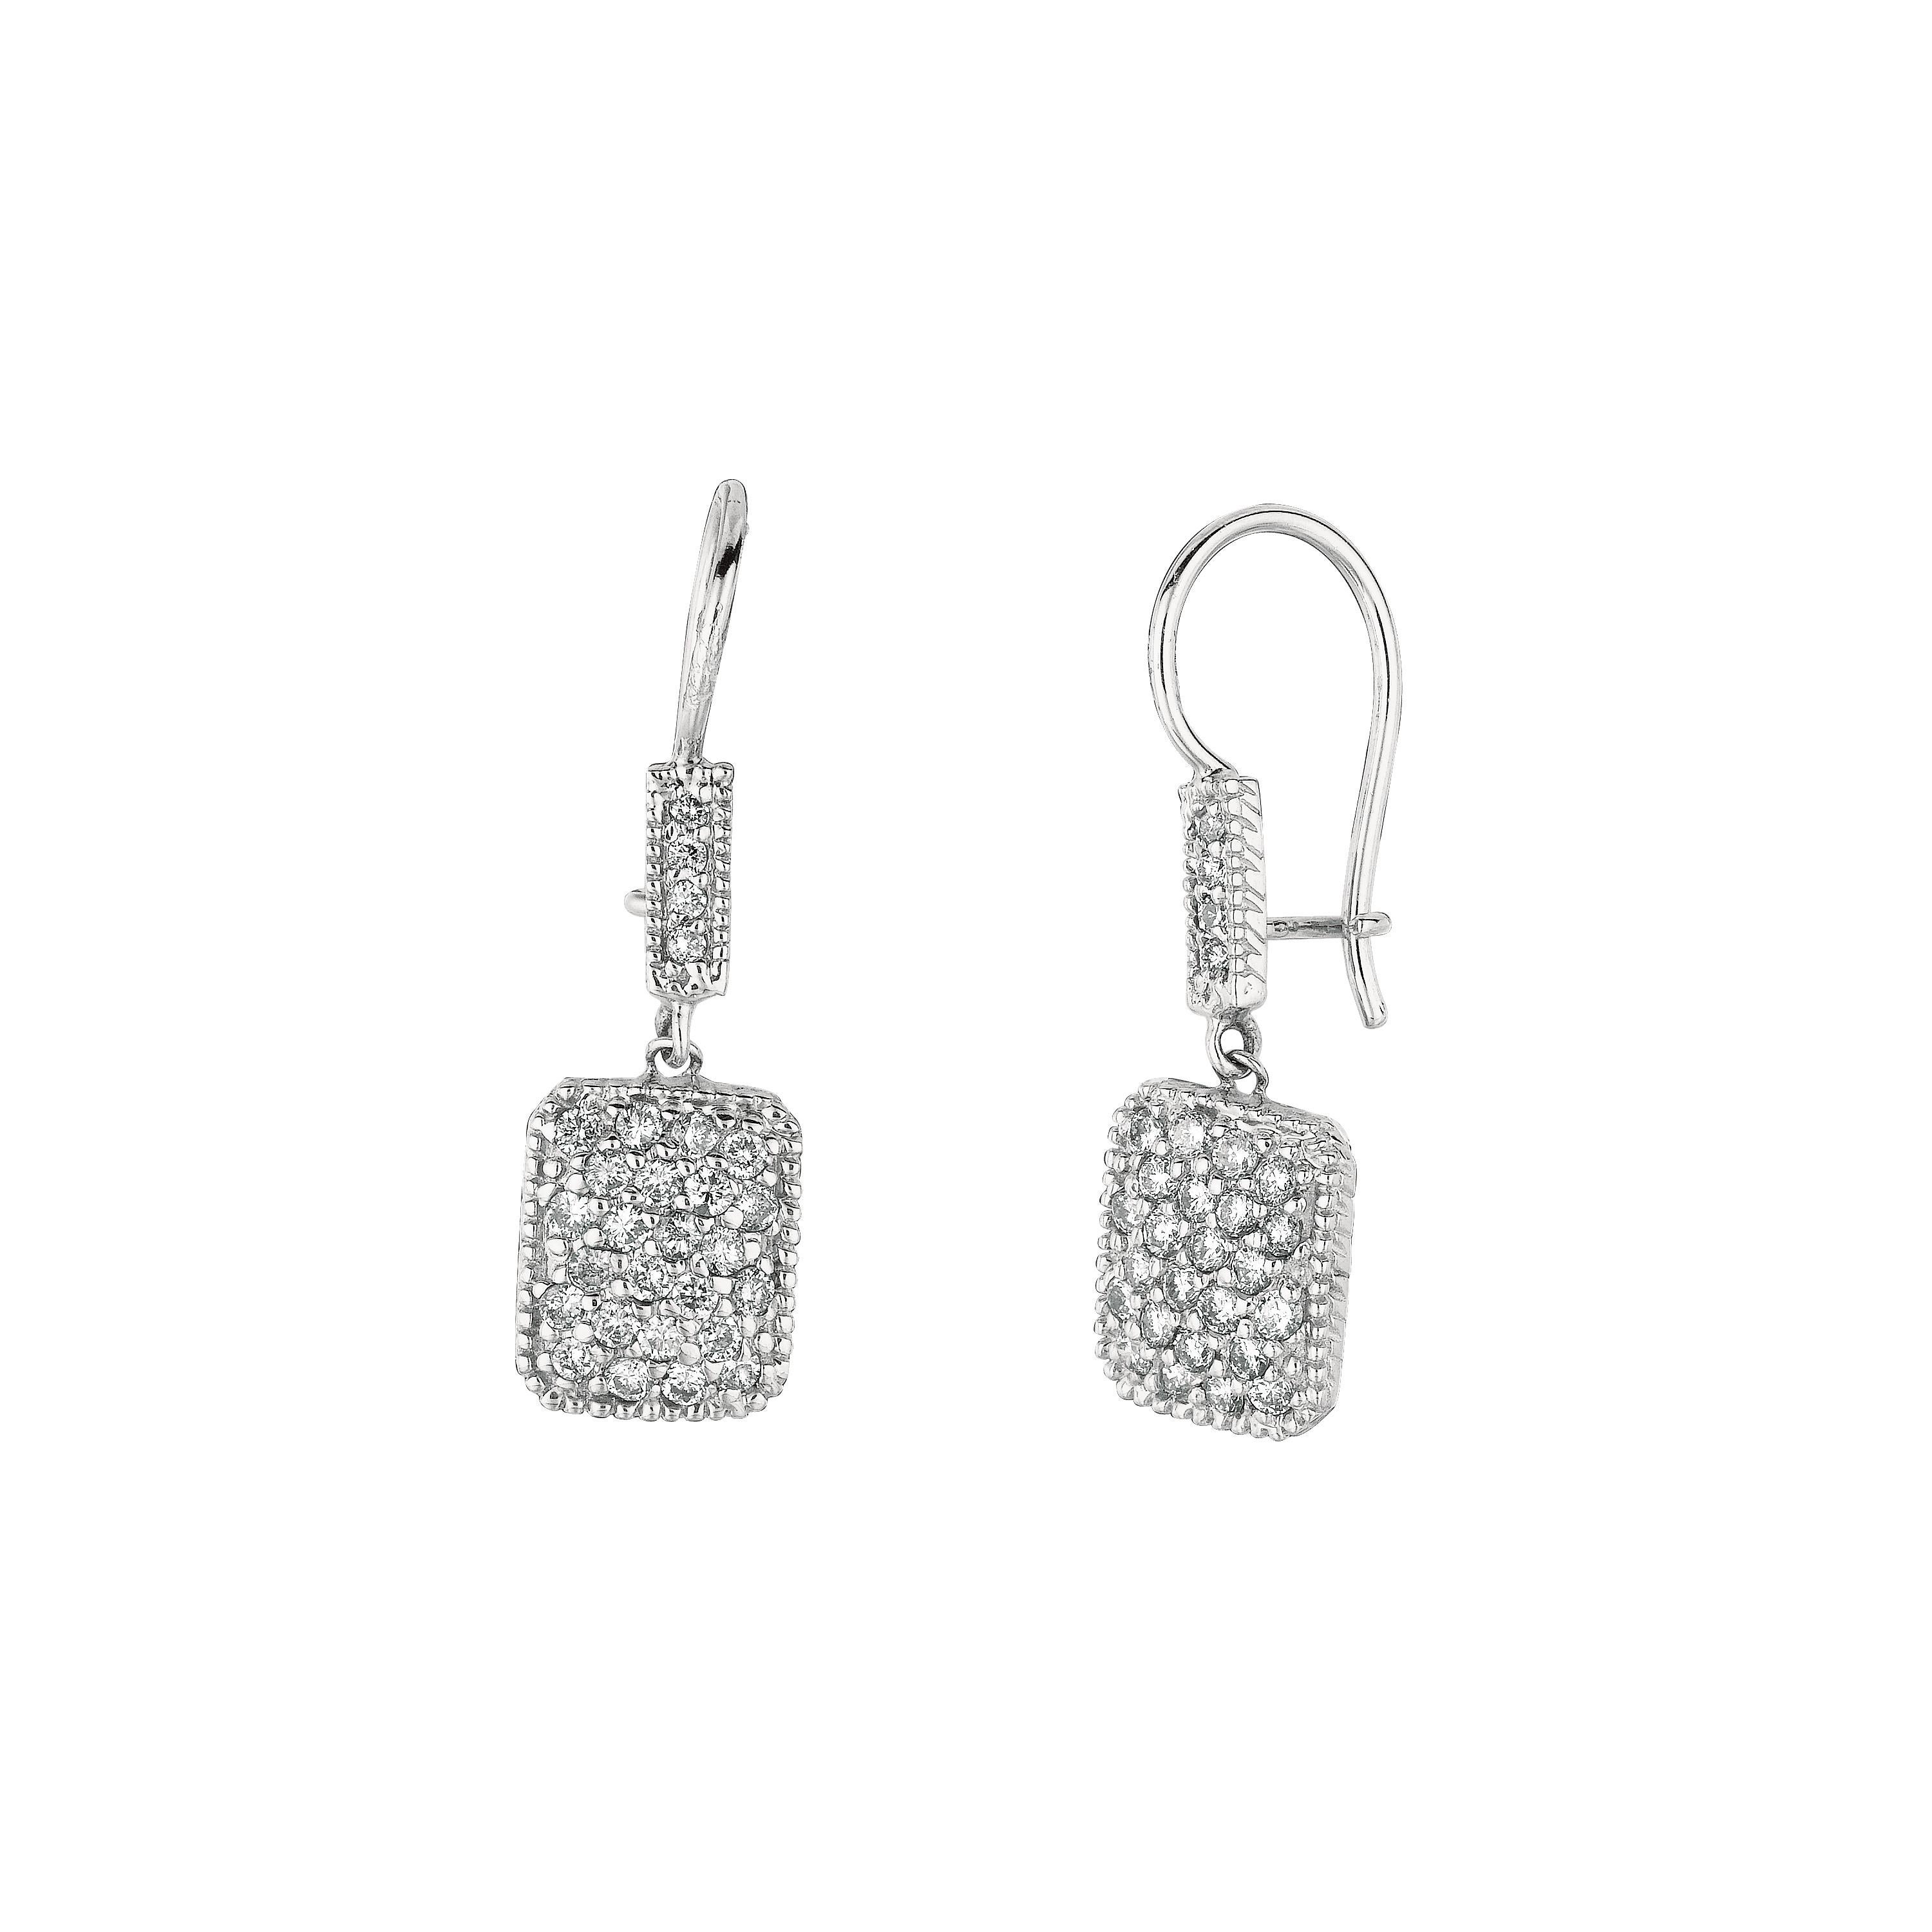 1.00 Carat Natural Diamond Drop Earrings G SI 14K White Gold

100% Natural, Not Enhanced in any way Round Cut Diamond Earrings
1.00CT
G-H 
SI  
14K White Gold,  2.7 grams, Pave Style
1 inch in height, 5/16 inch in width
56 diamonds 

E5030WD
ALL OUR